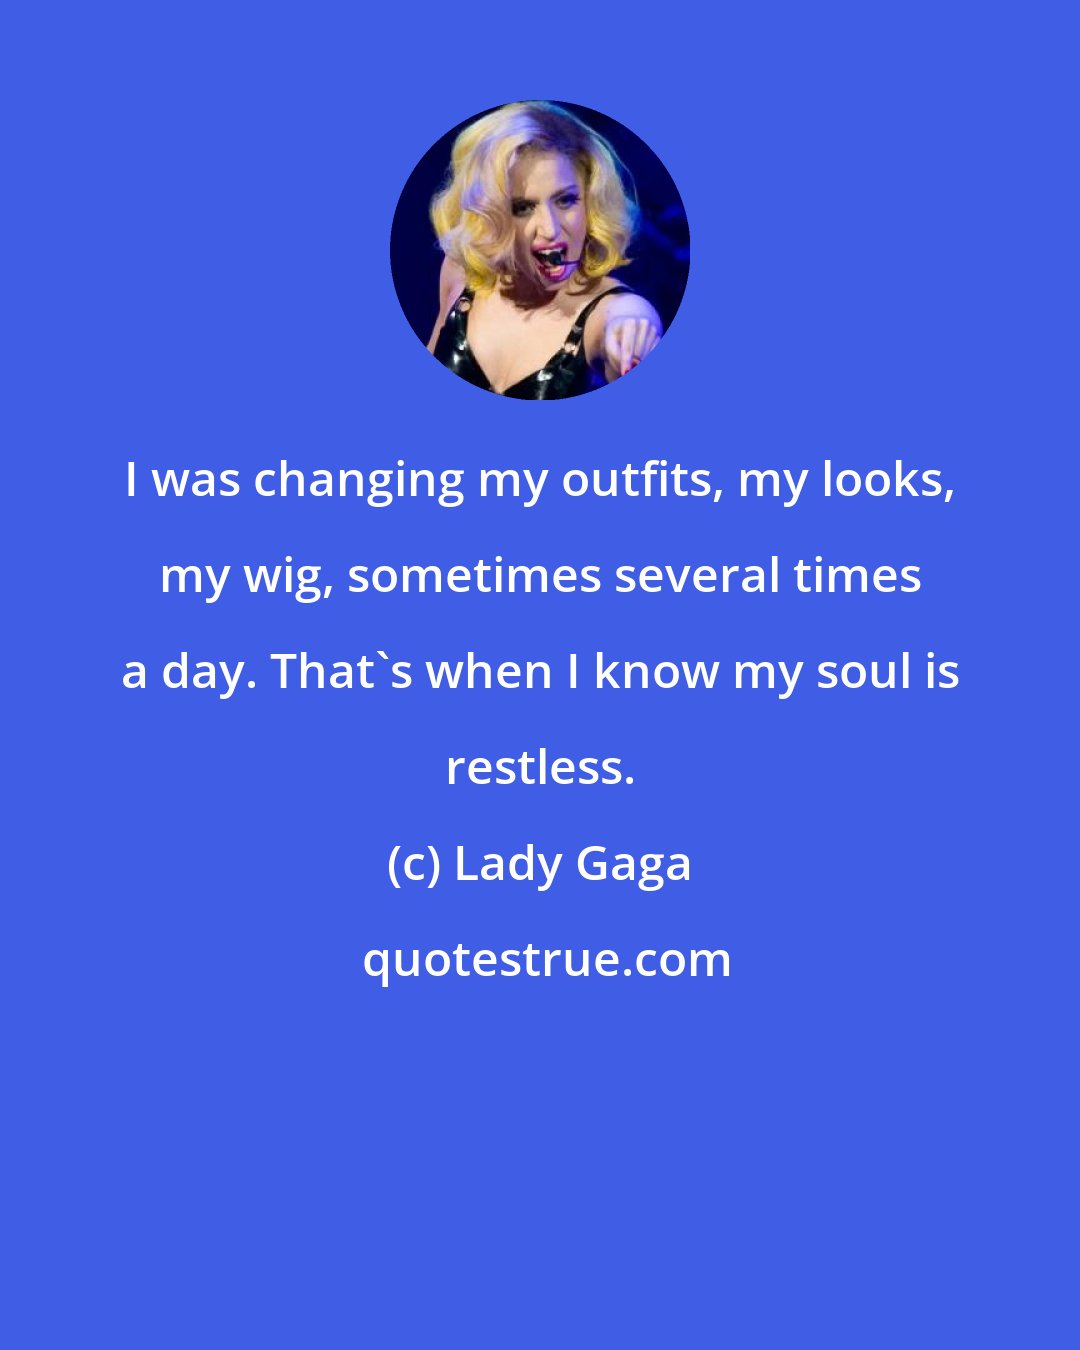 Lady Gaga: I was changing my outfits, my looks, my wig, sometimes several times a day. That's when I know my soul is restless.